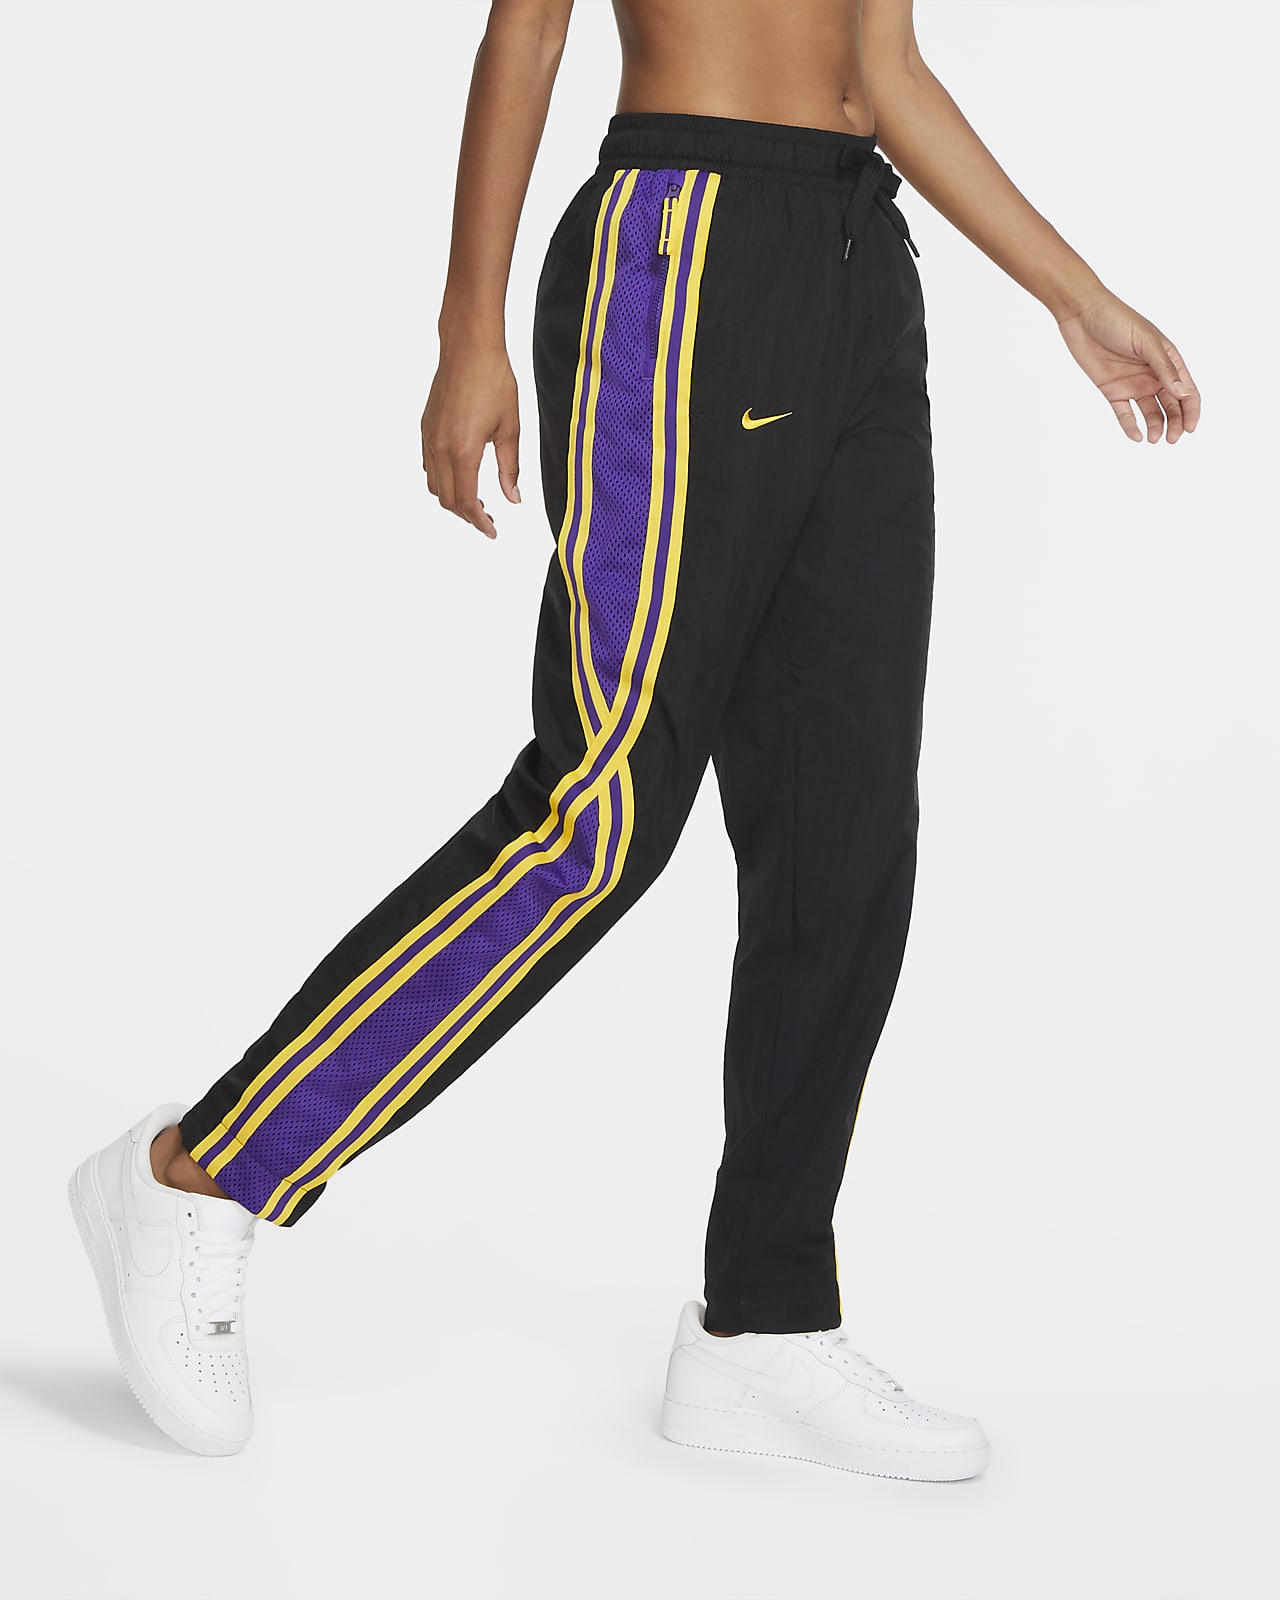 lakers tracksuit